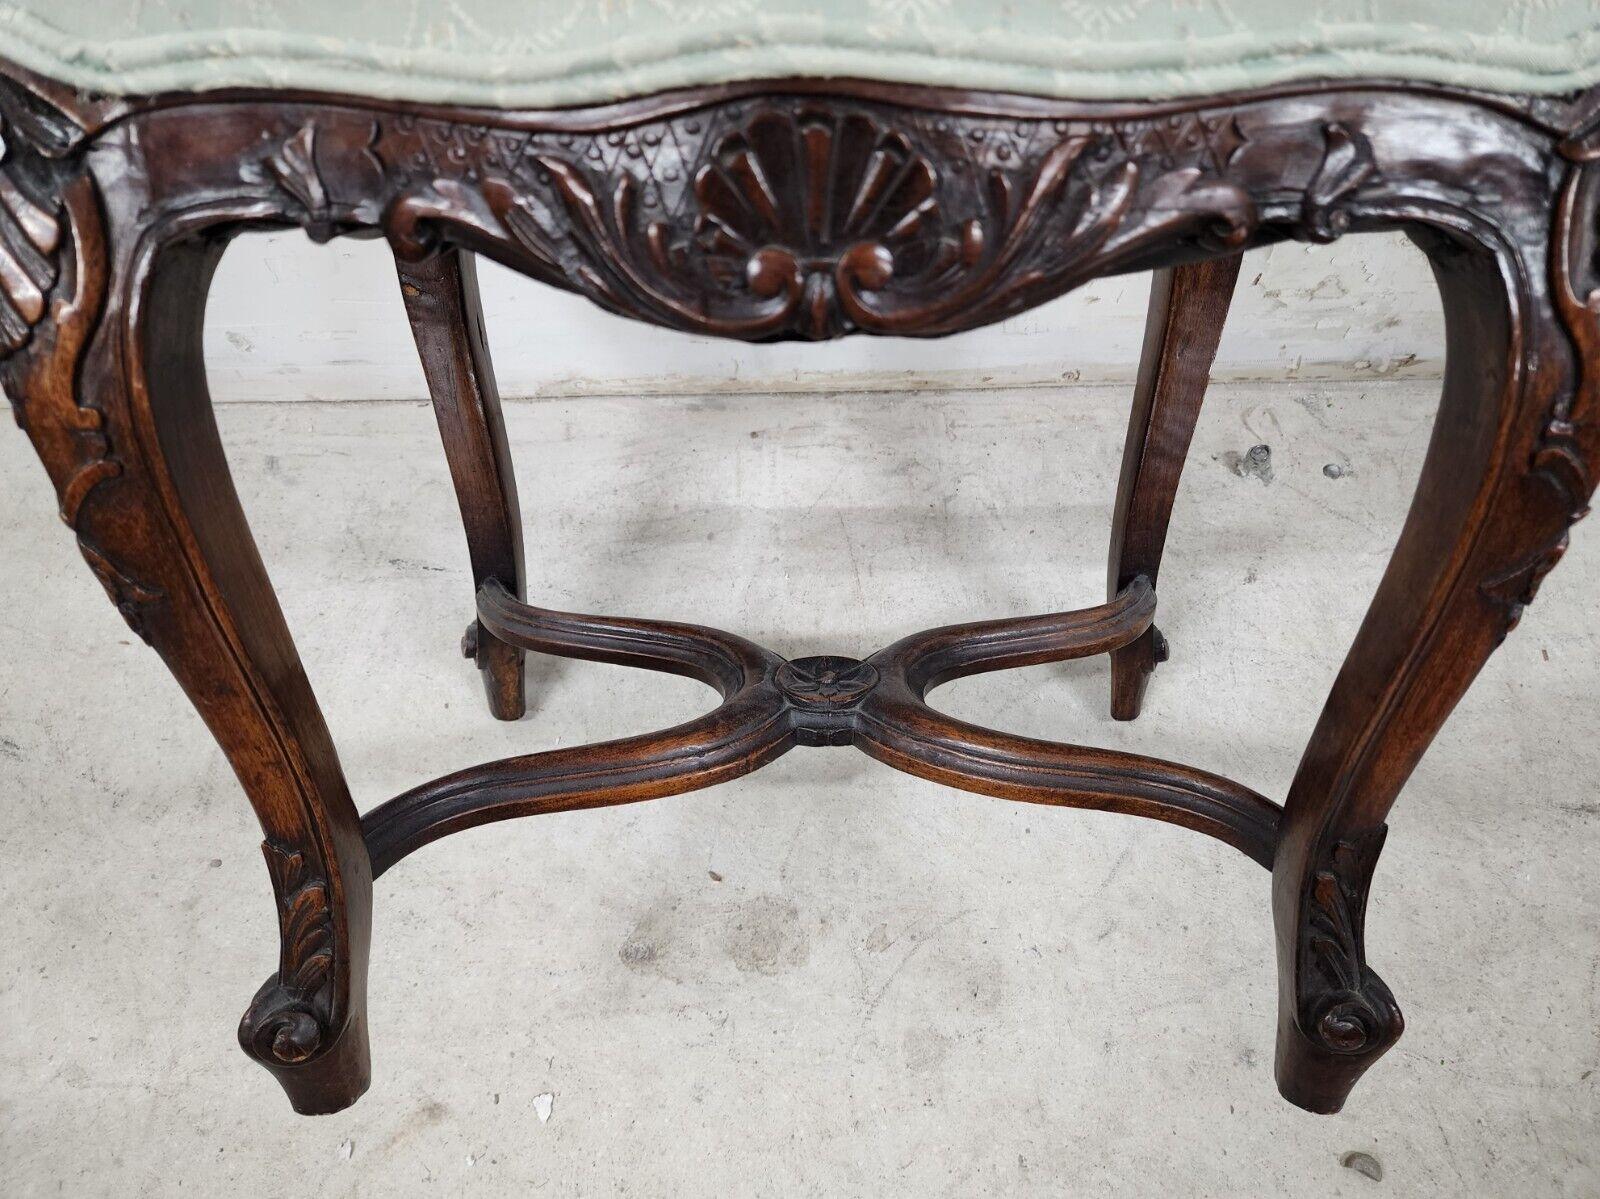 For FULL item description click on CONTINUE READING at the bottom of this page.

Offering One Of Our Recent Palm Beach Estate Fine Furniture Acquisitions Of An 
Antique 1800s French Louis XV Style Ottoman Footstool 
We had 2 of these available